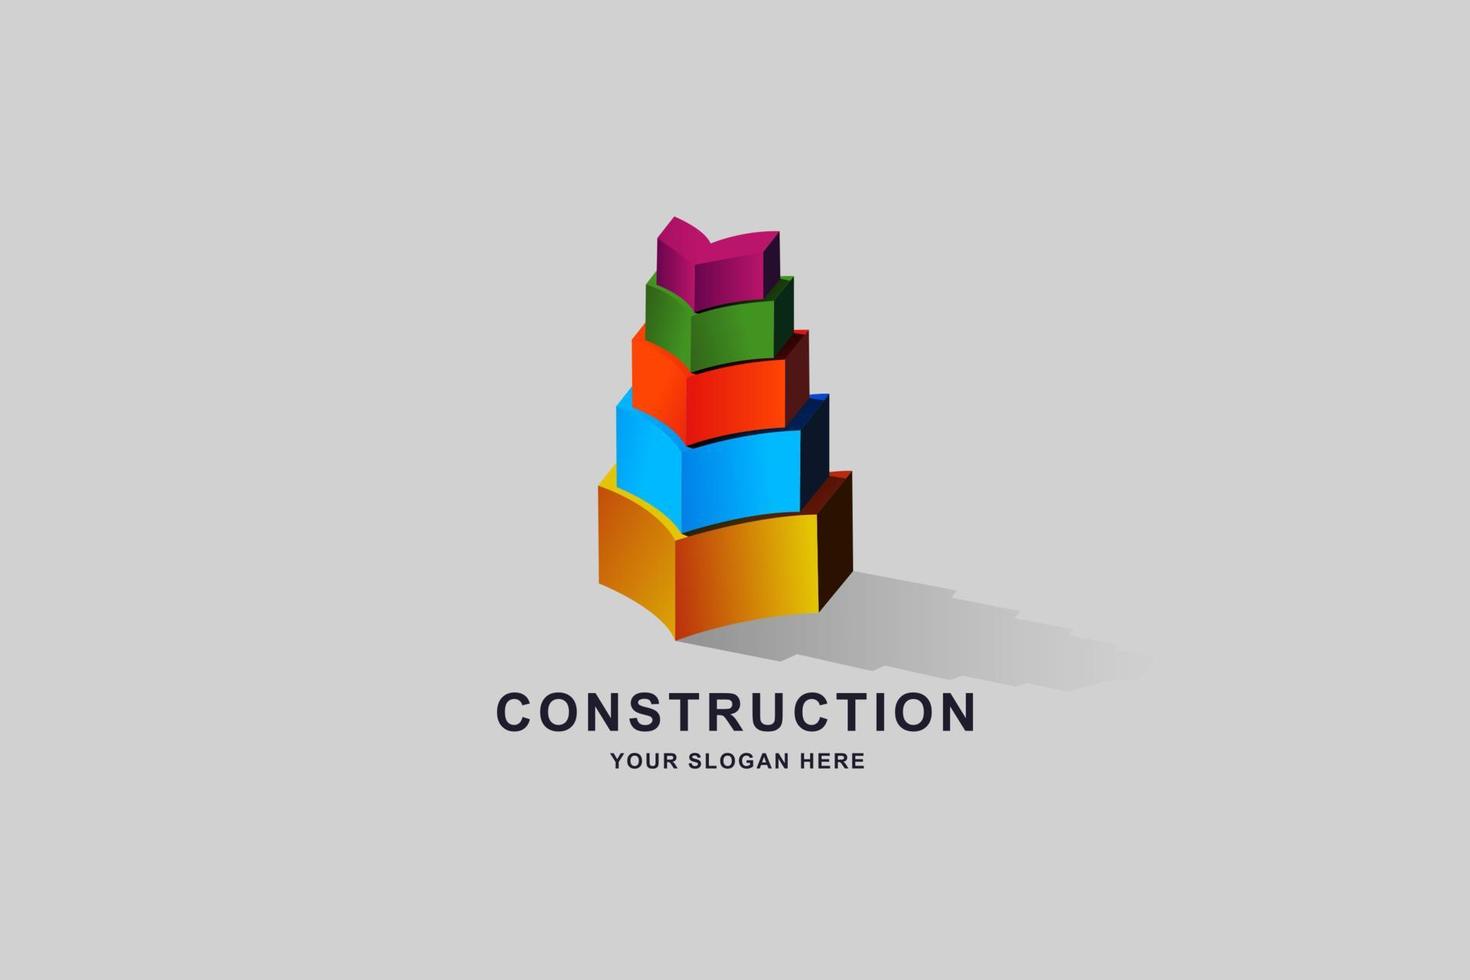 Construction buildings or 3D perspective logo design template vector